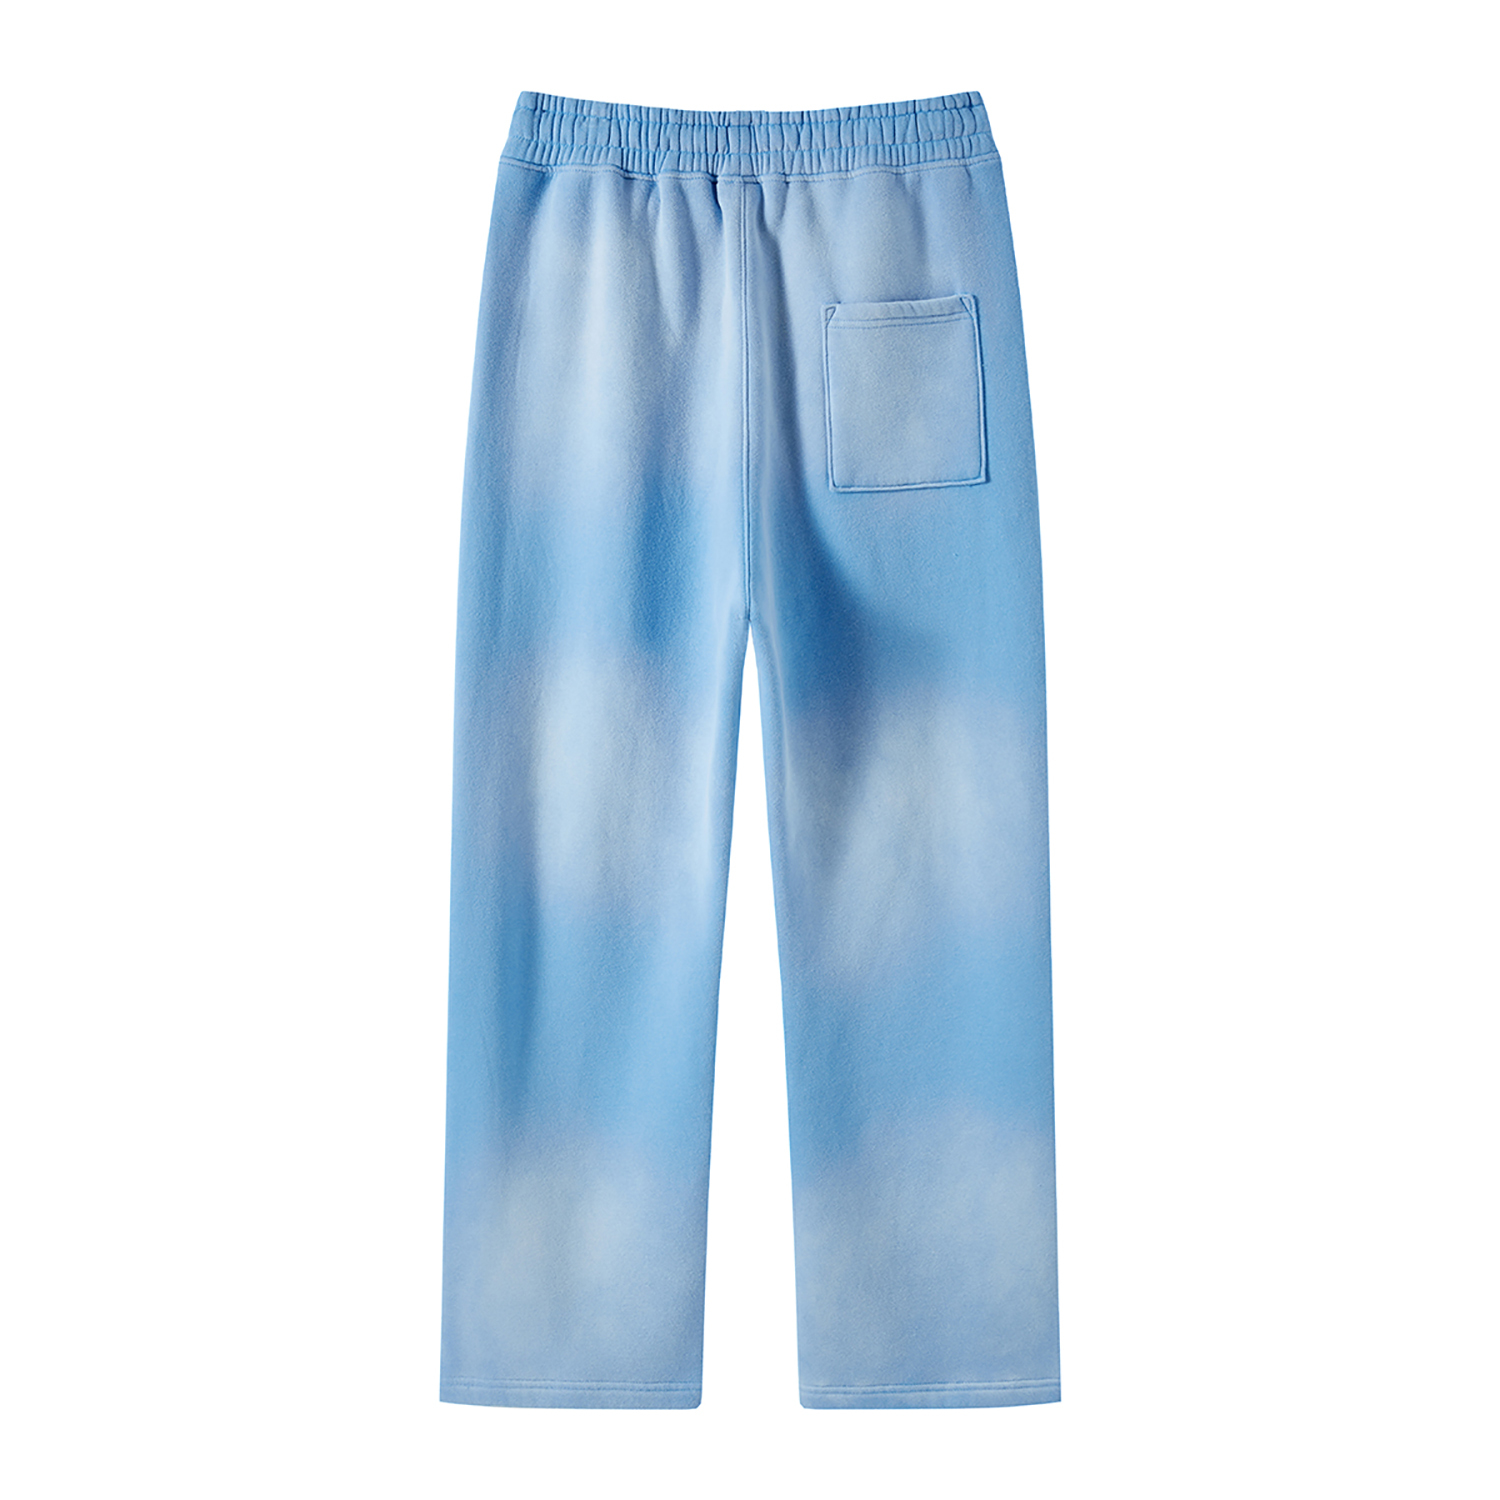 Streetwear Colored Gradient Washed Effect Pants - Dropshipping-21